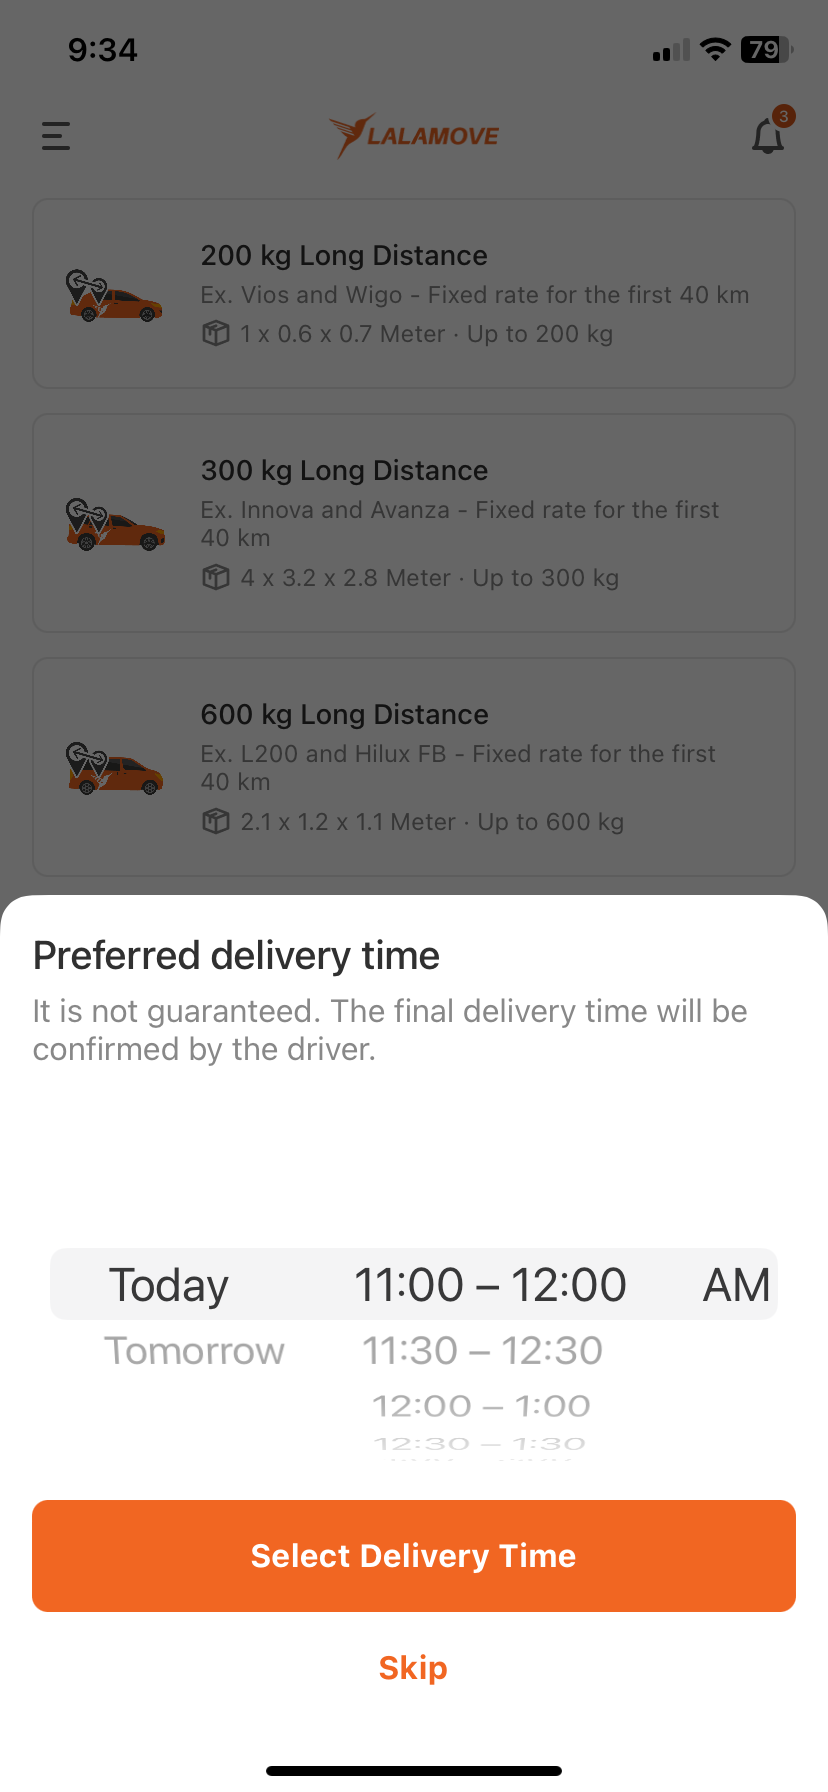 Select Preferred Delivery Time (Fulll)